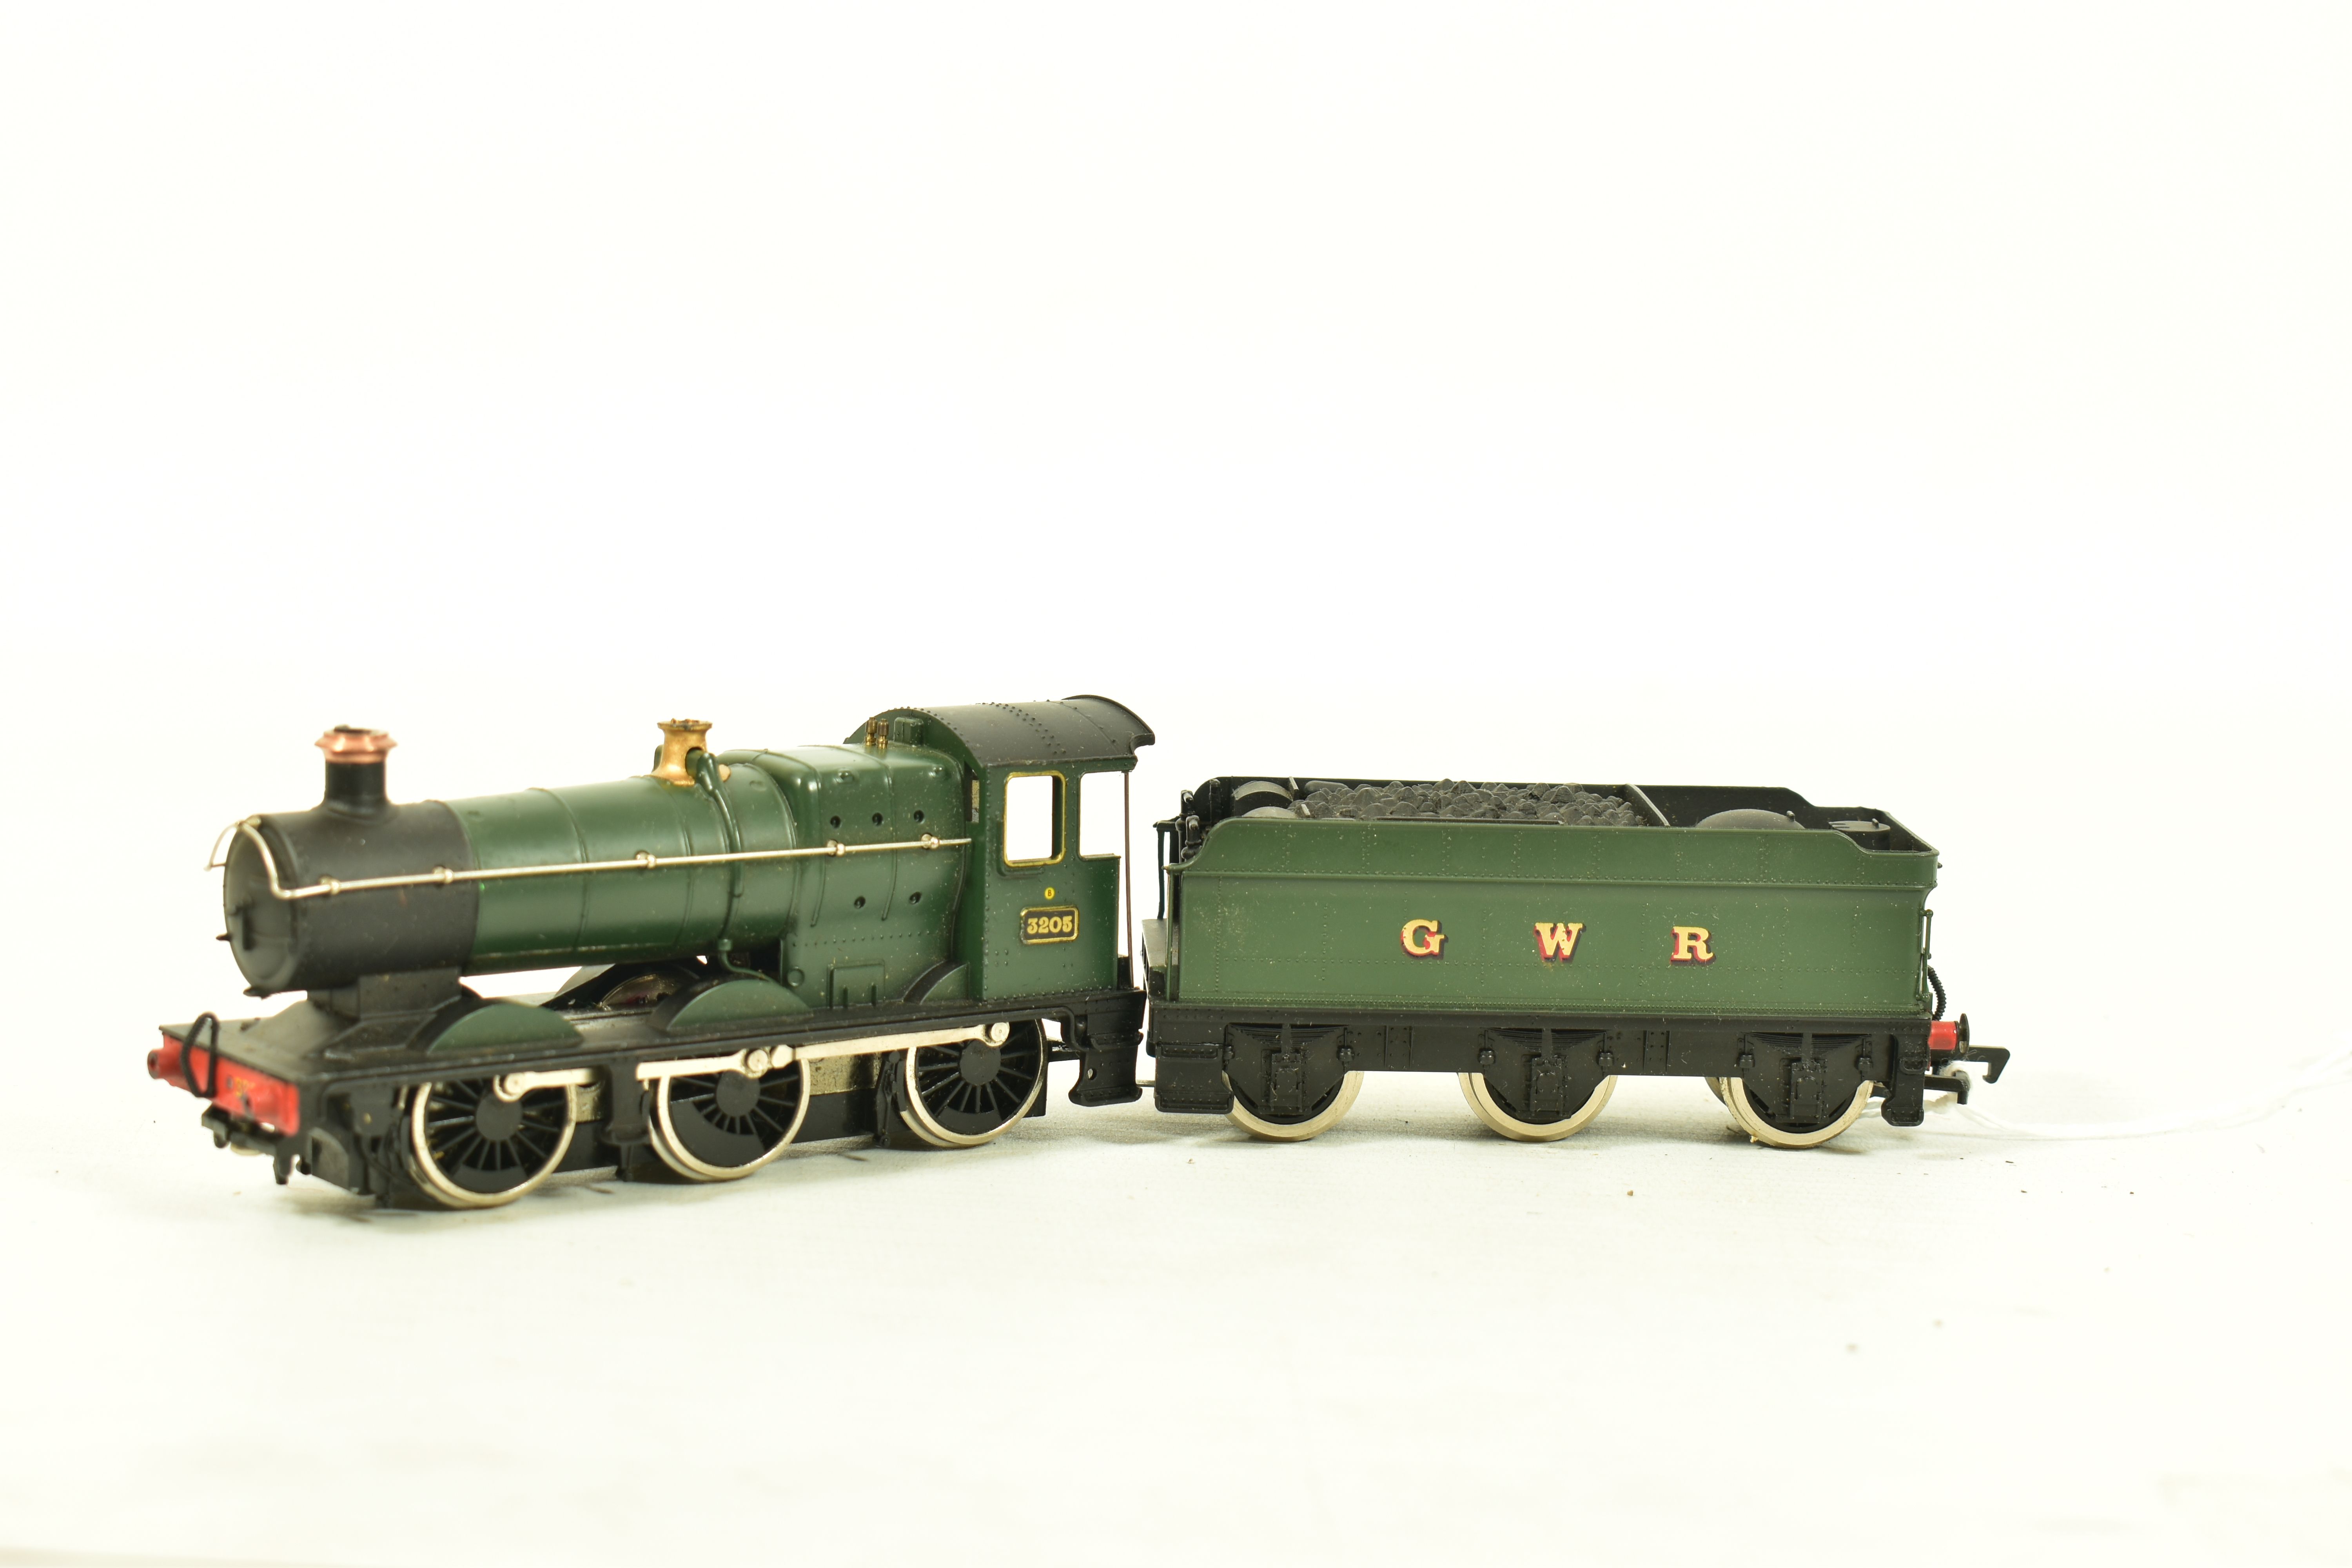 FOUR BOXED MAINLINE OO GAUGE COLLETT GOODS LOCOMOTIVES, 2 x No.3205, G.W.R. green livery (37 058), - Image 8 of 9